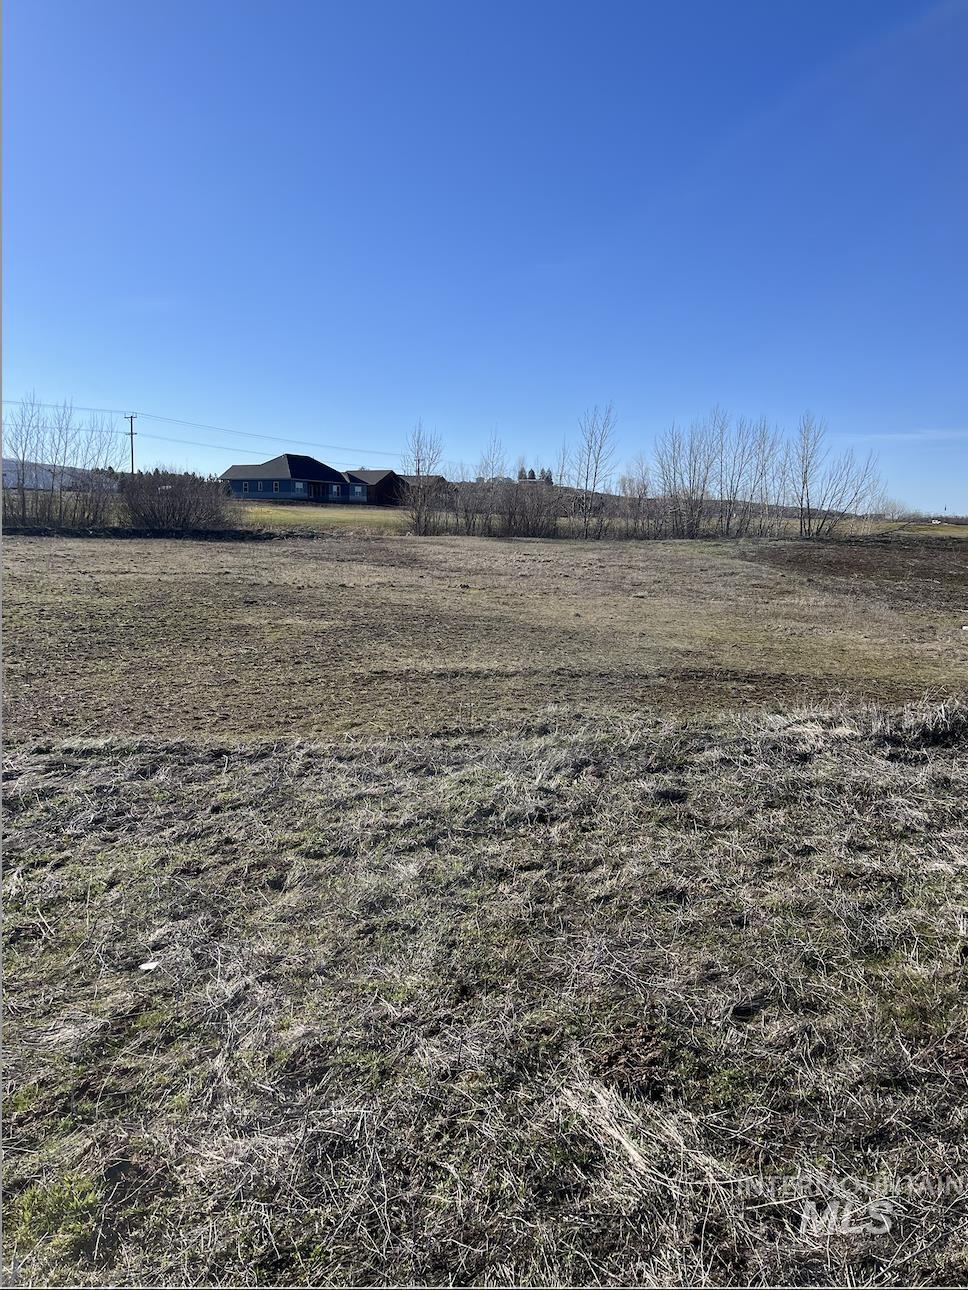 TBD .43 Fairway Dr, Council, Idaho 83612, Land For Sale, Price $52,470,MLS 98907136